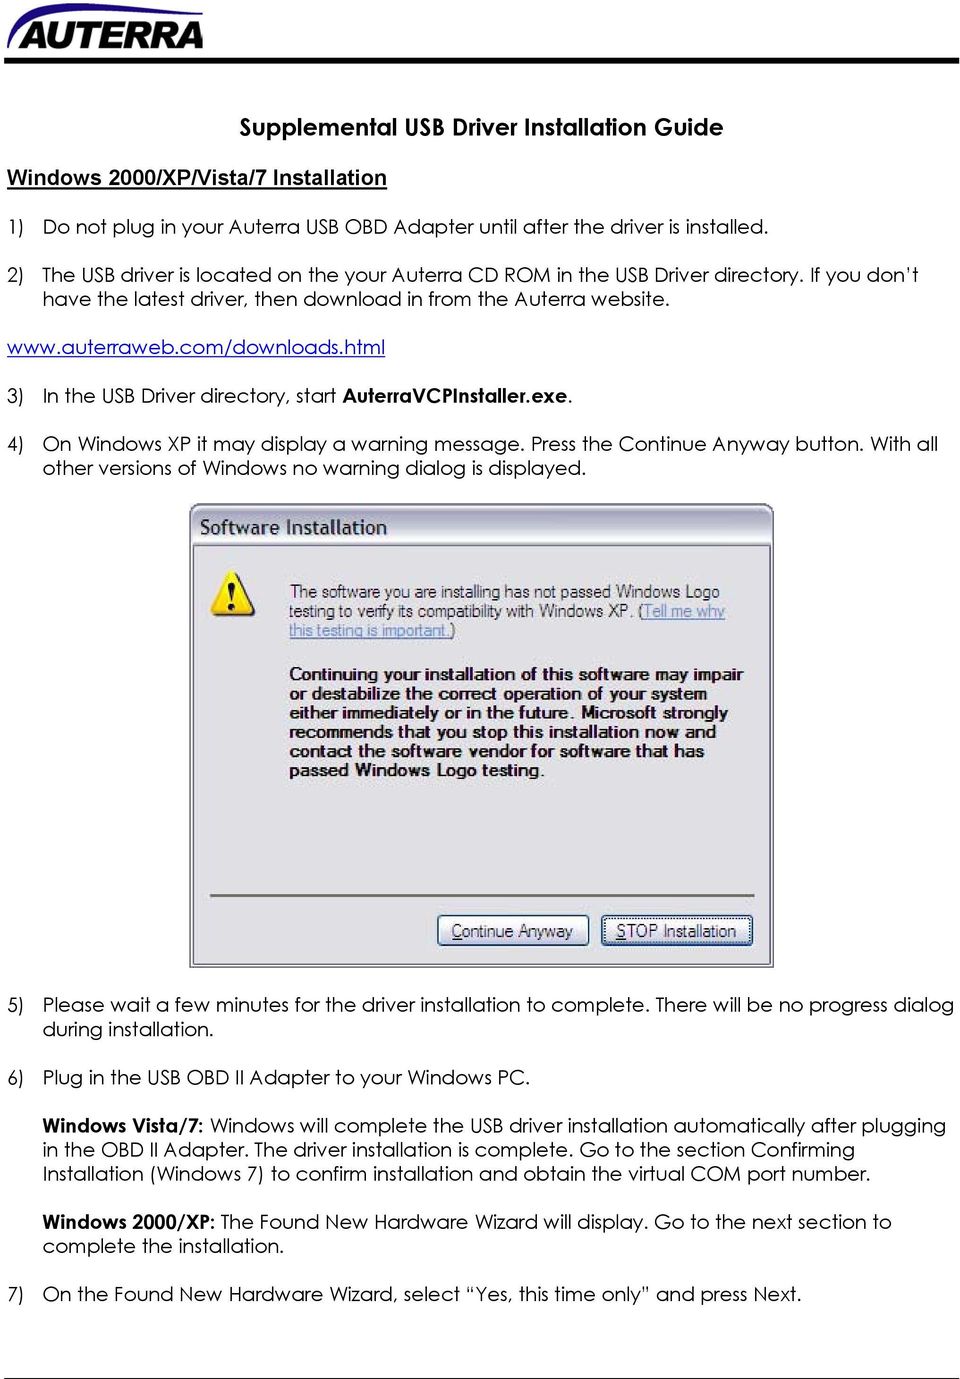 html 3) In the USB Driver directory, start AuterraVCPInstaller.exe. 4) On Windows XP it may display a warning message. Press the Continue Anyway button.